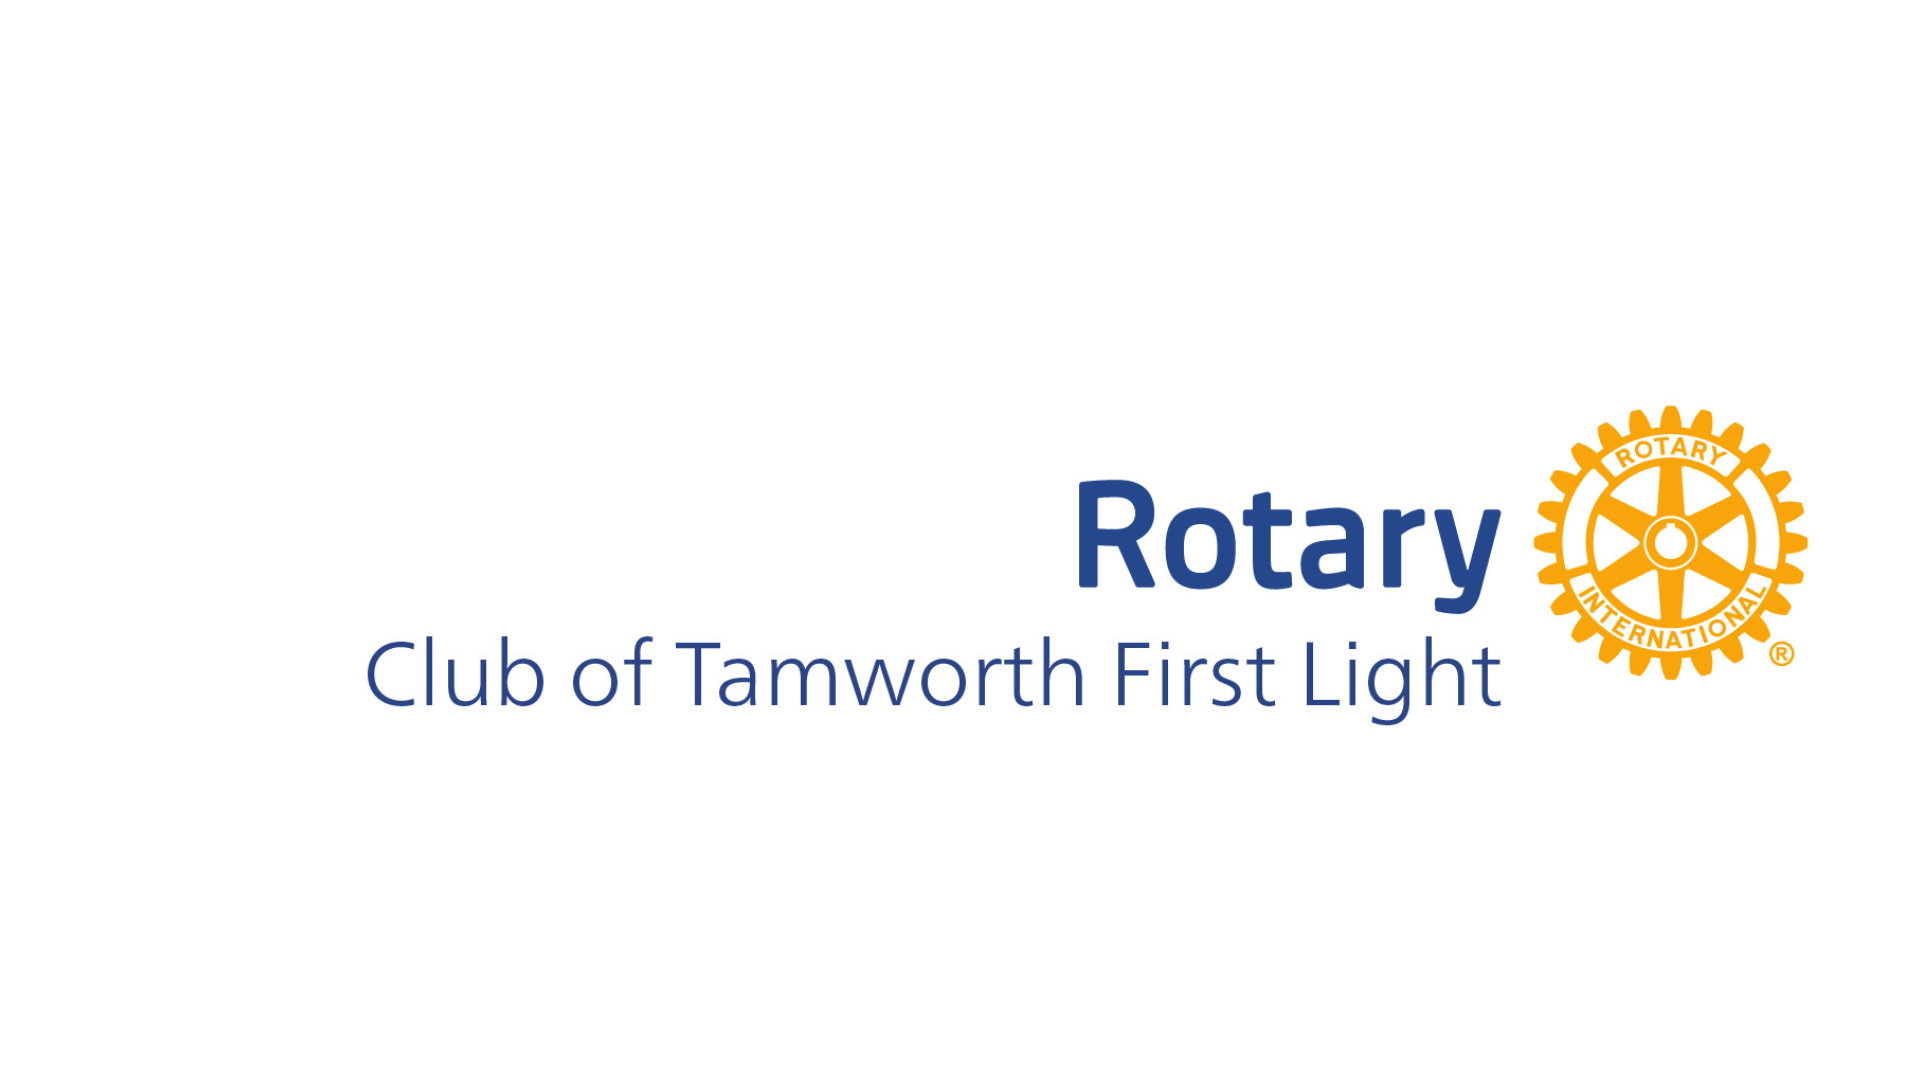 Gold Rotary wheel with blue text that says Rotary Club of Tamworth First Light